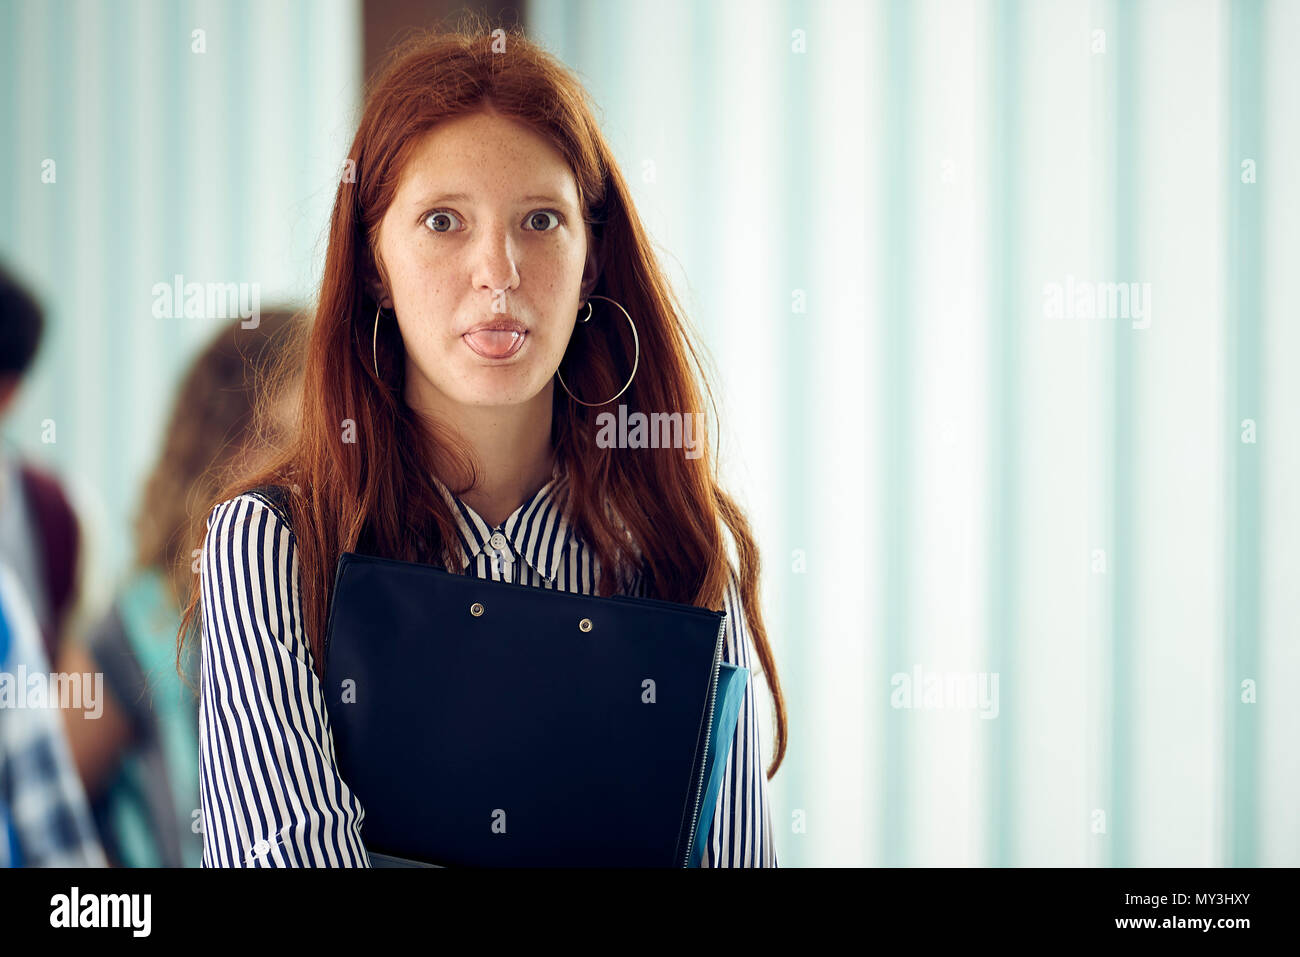 Young woman sticking out tongue in corridor Stock Photo